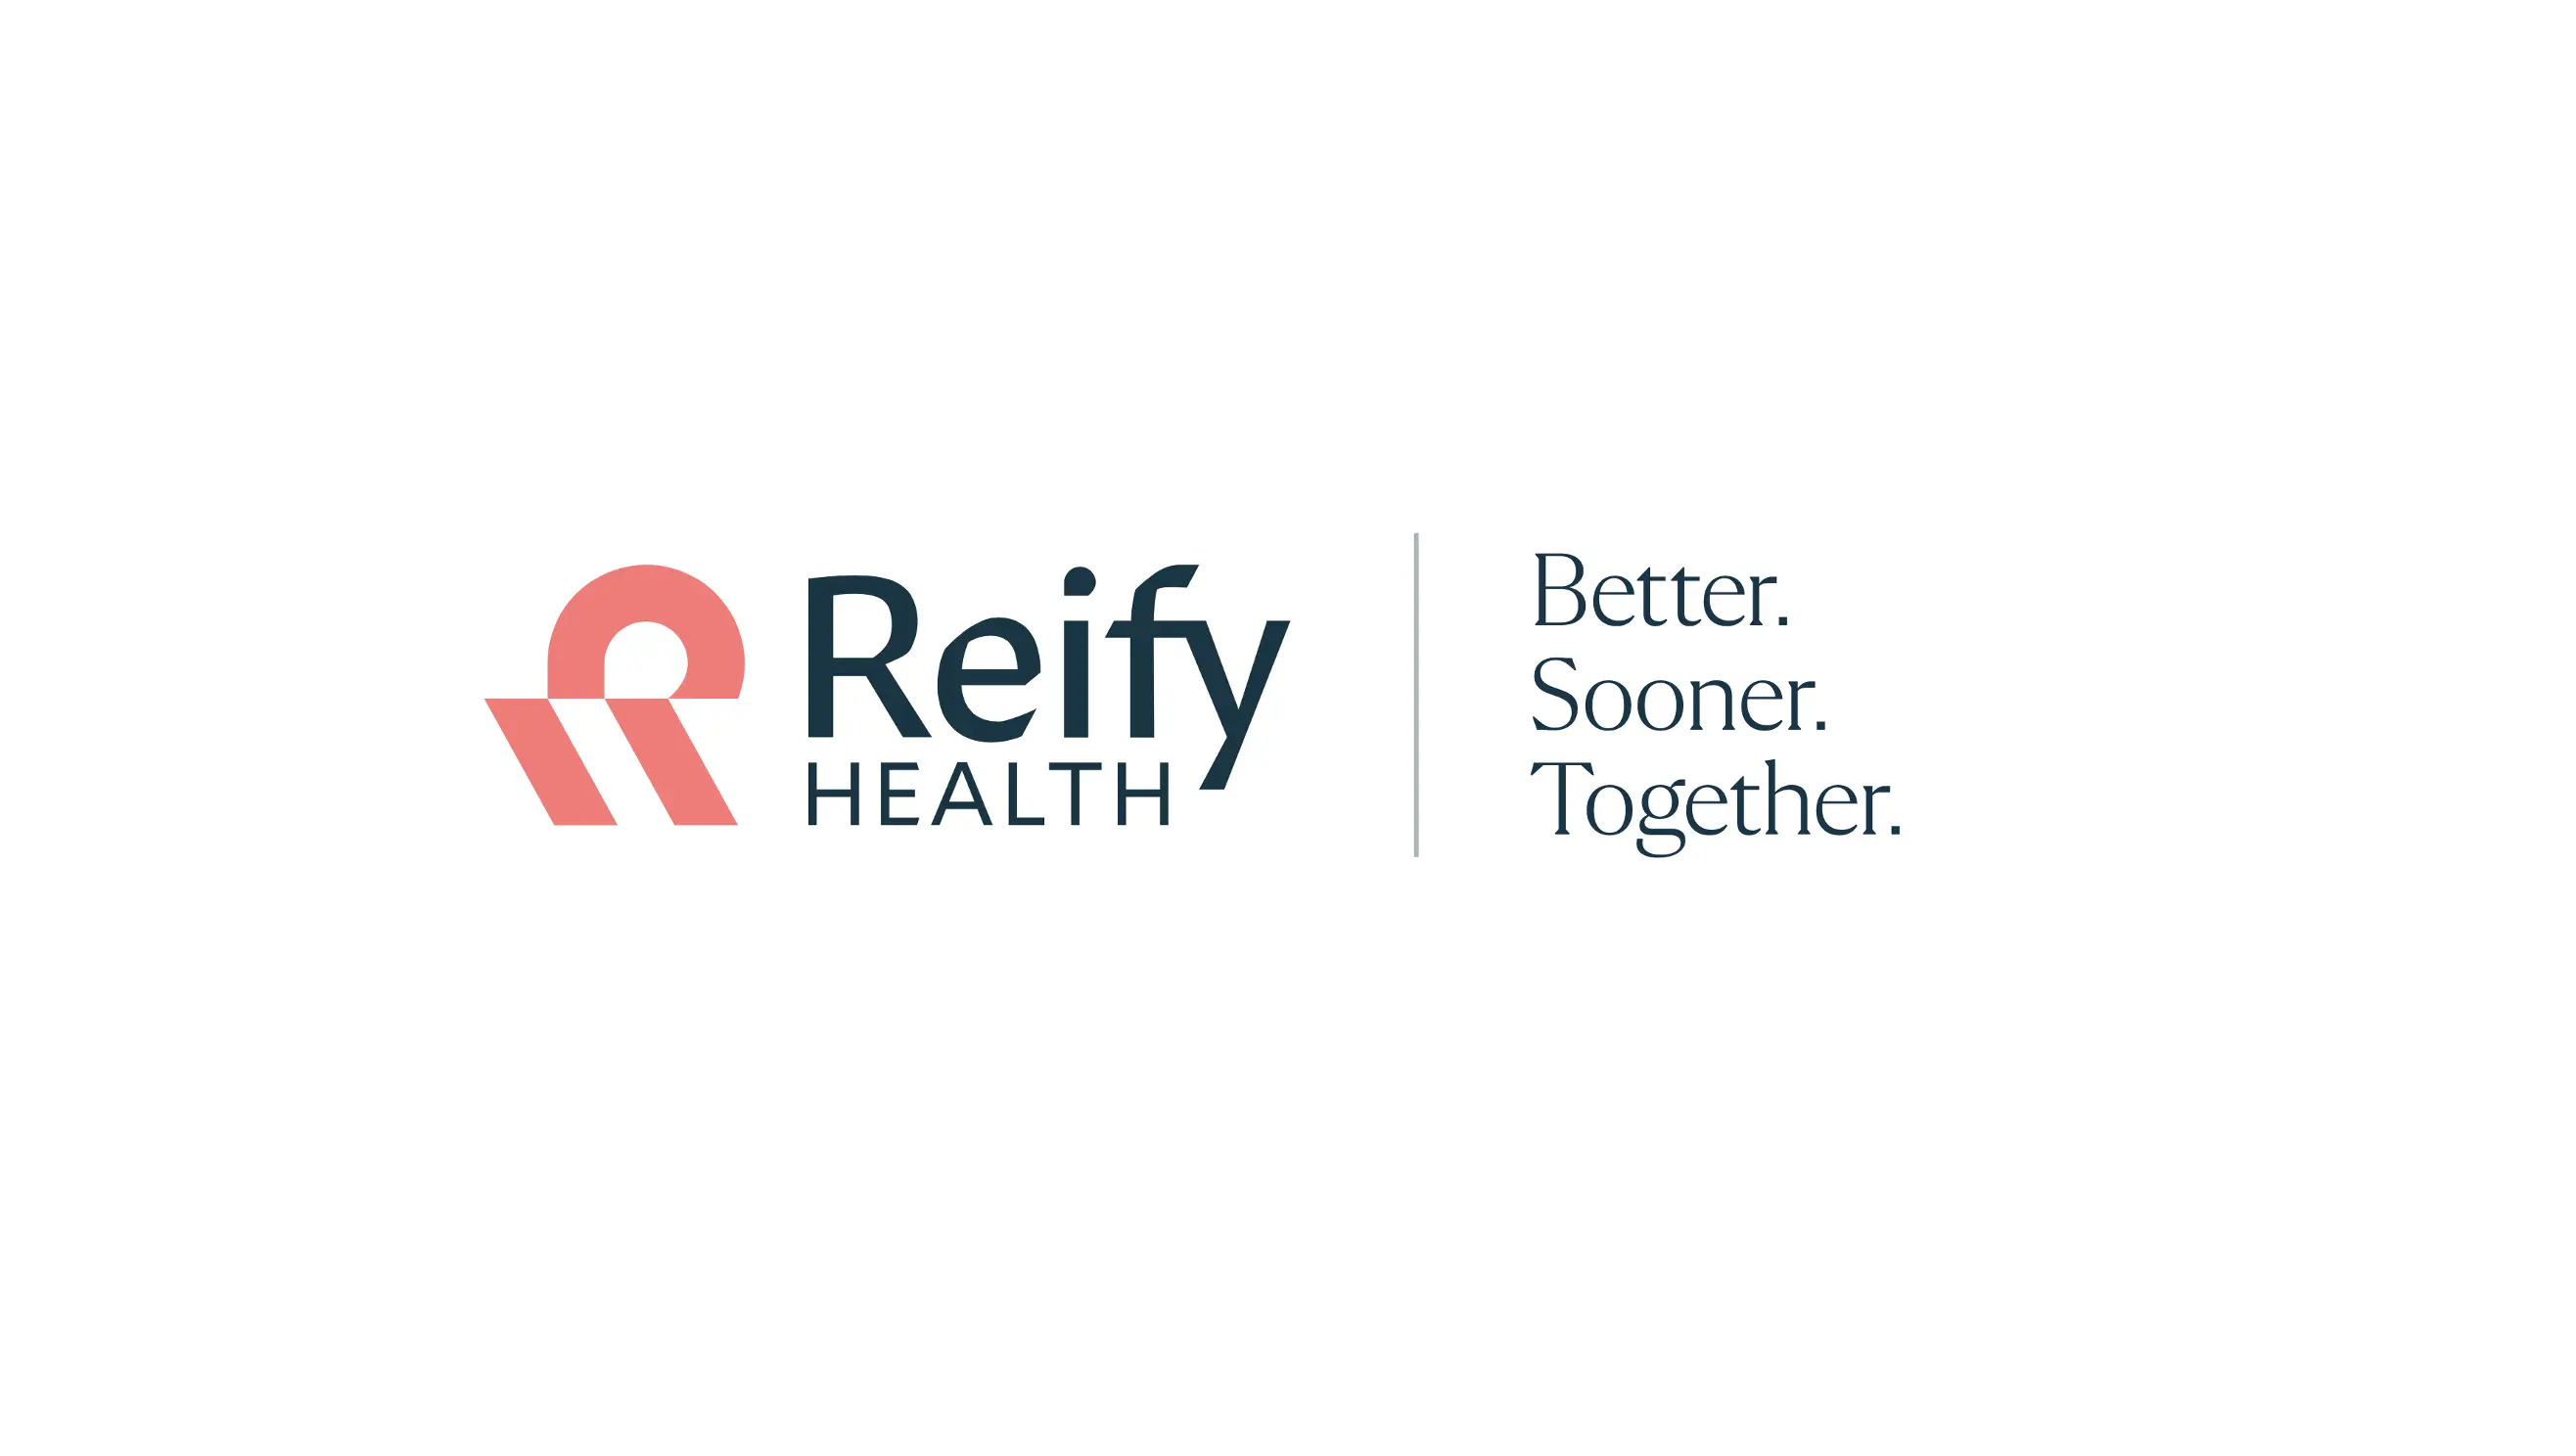 SubjectWell and Reify Health Surveyed Clinical Trial Sites, Examined Patient Concerns and Site Safety Protocols in the Face of COVID-19